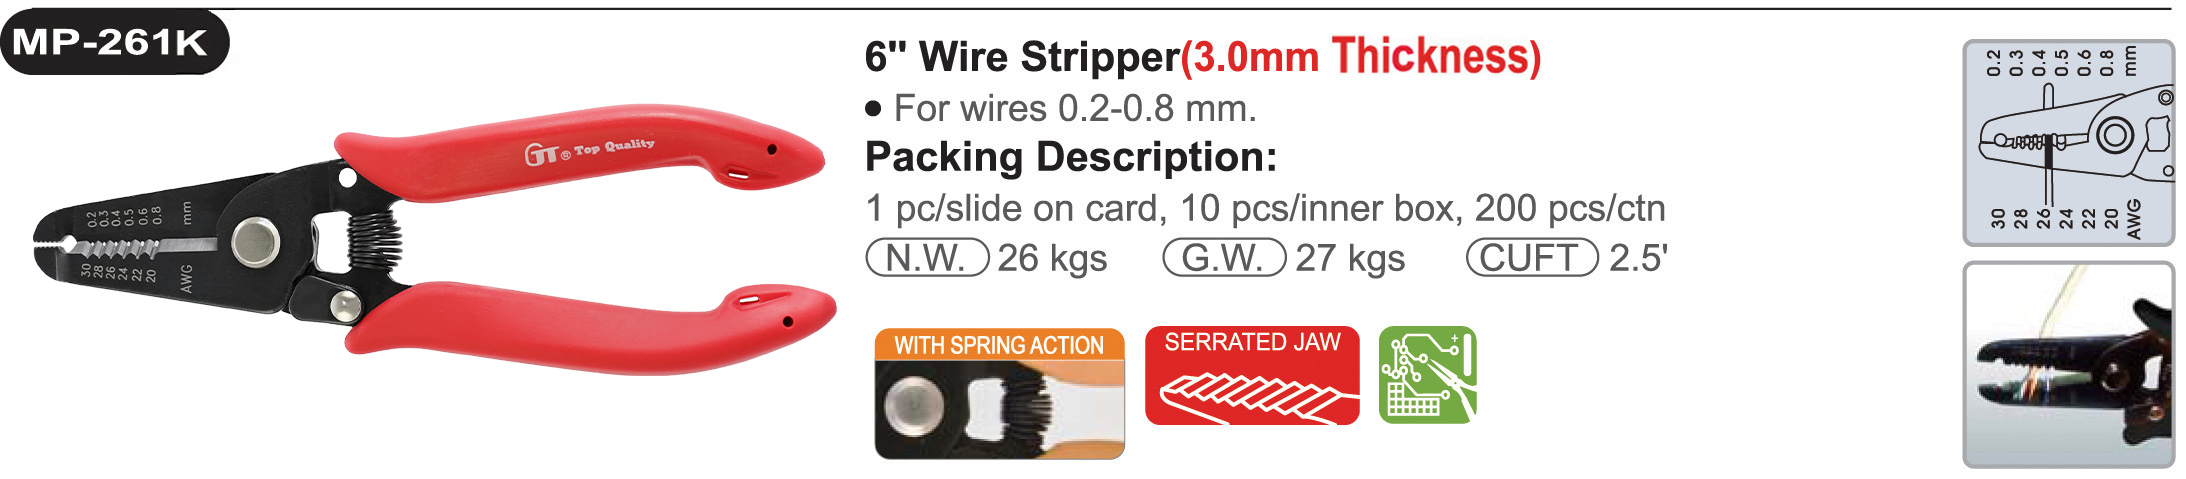 proimages/product/pliers/wire_strippers/Wire_Stripper/MP-261K/MP-261K.jpg